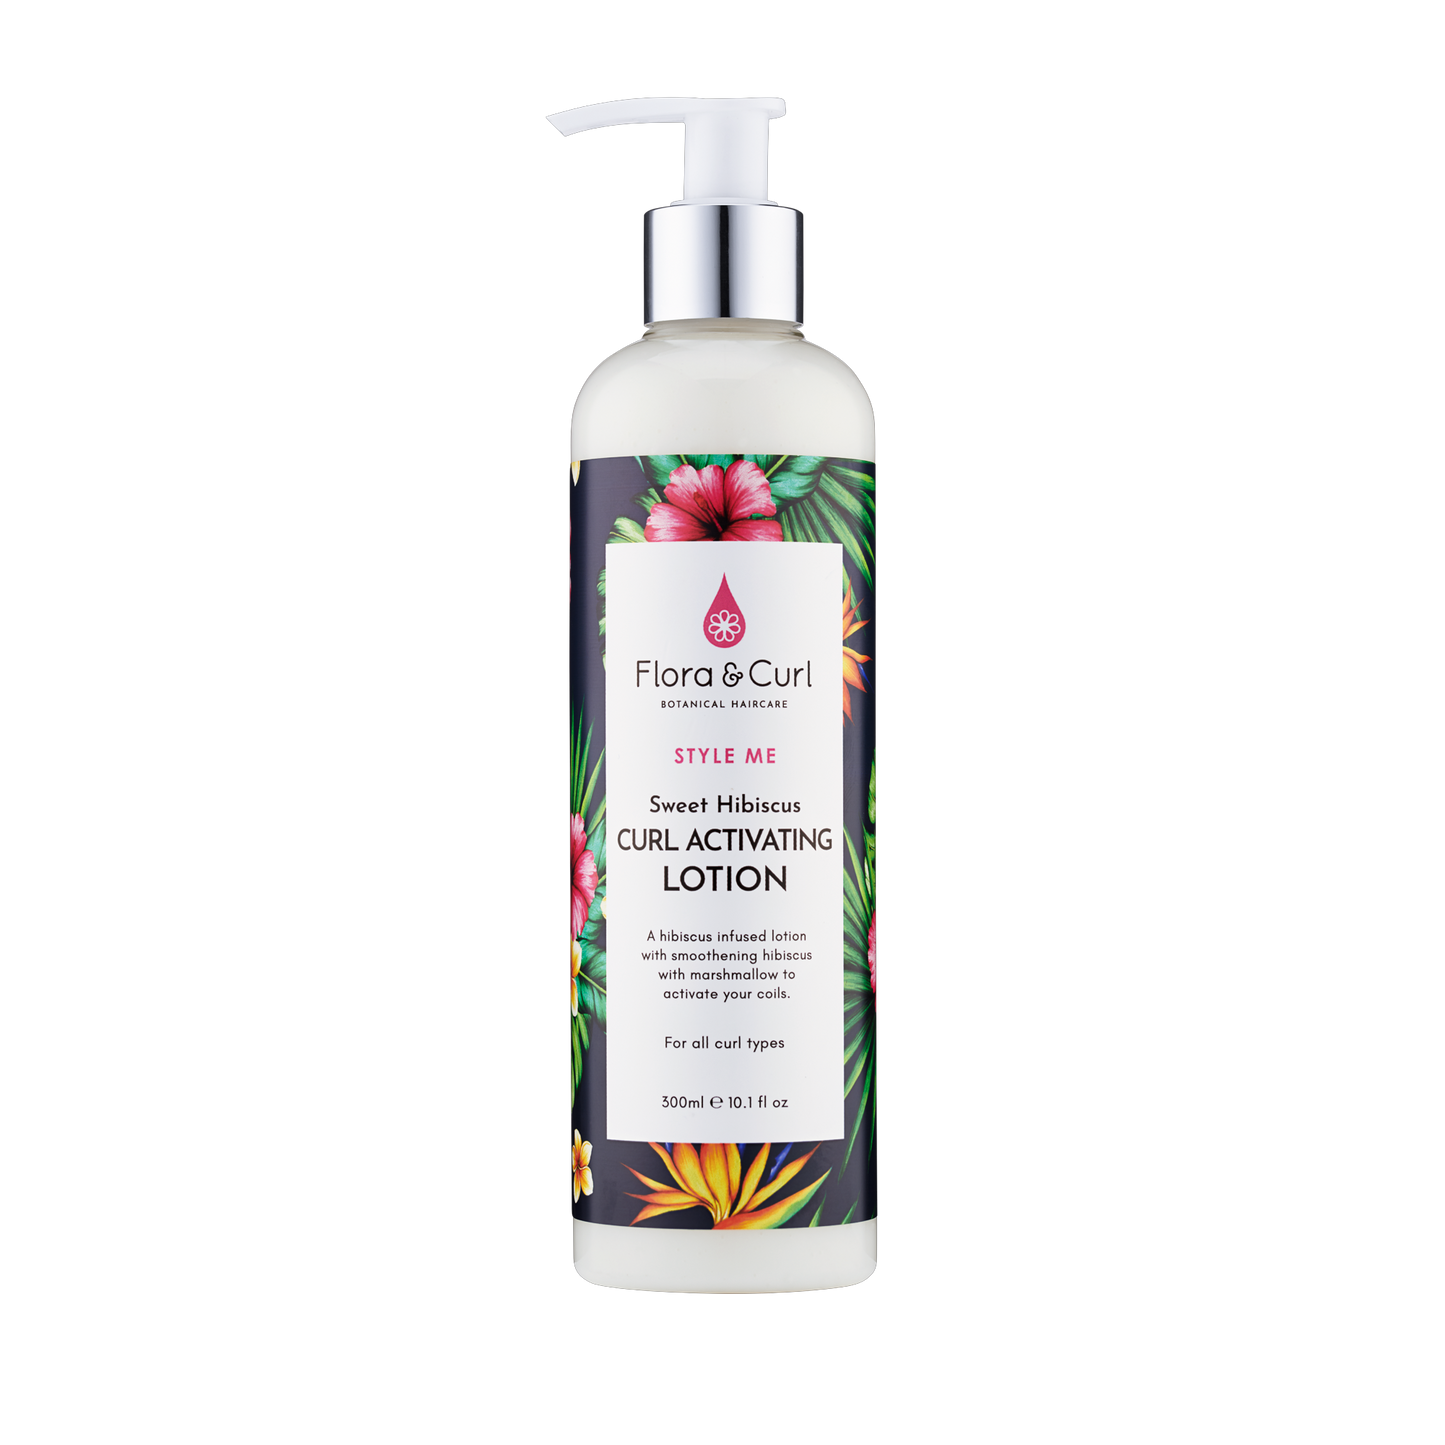 Sweet Hibiscus Curl Activating Lotion